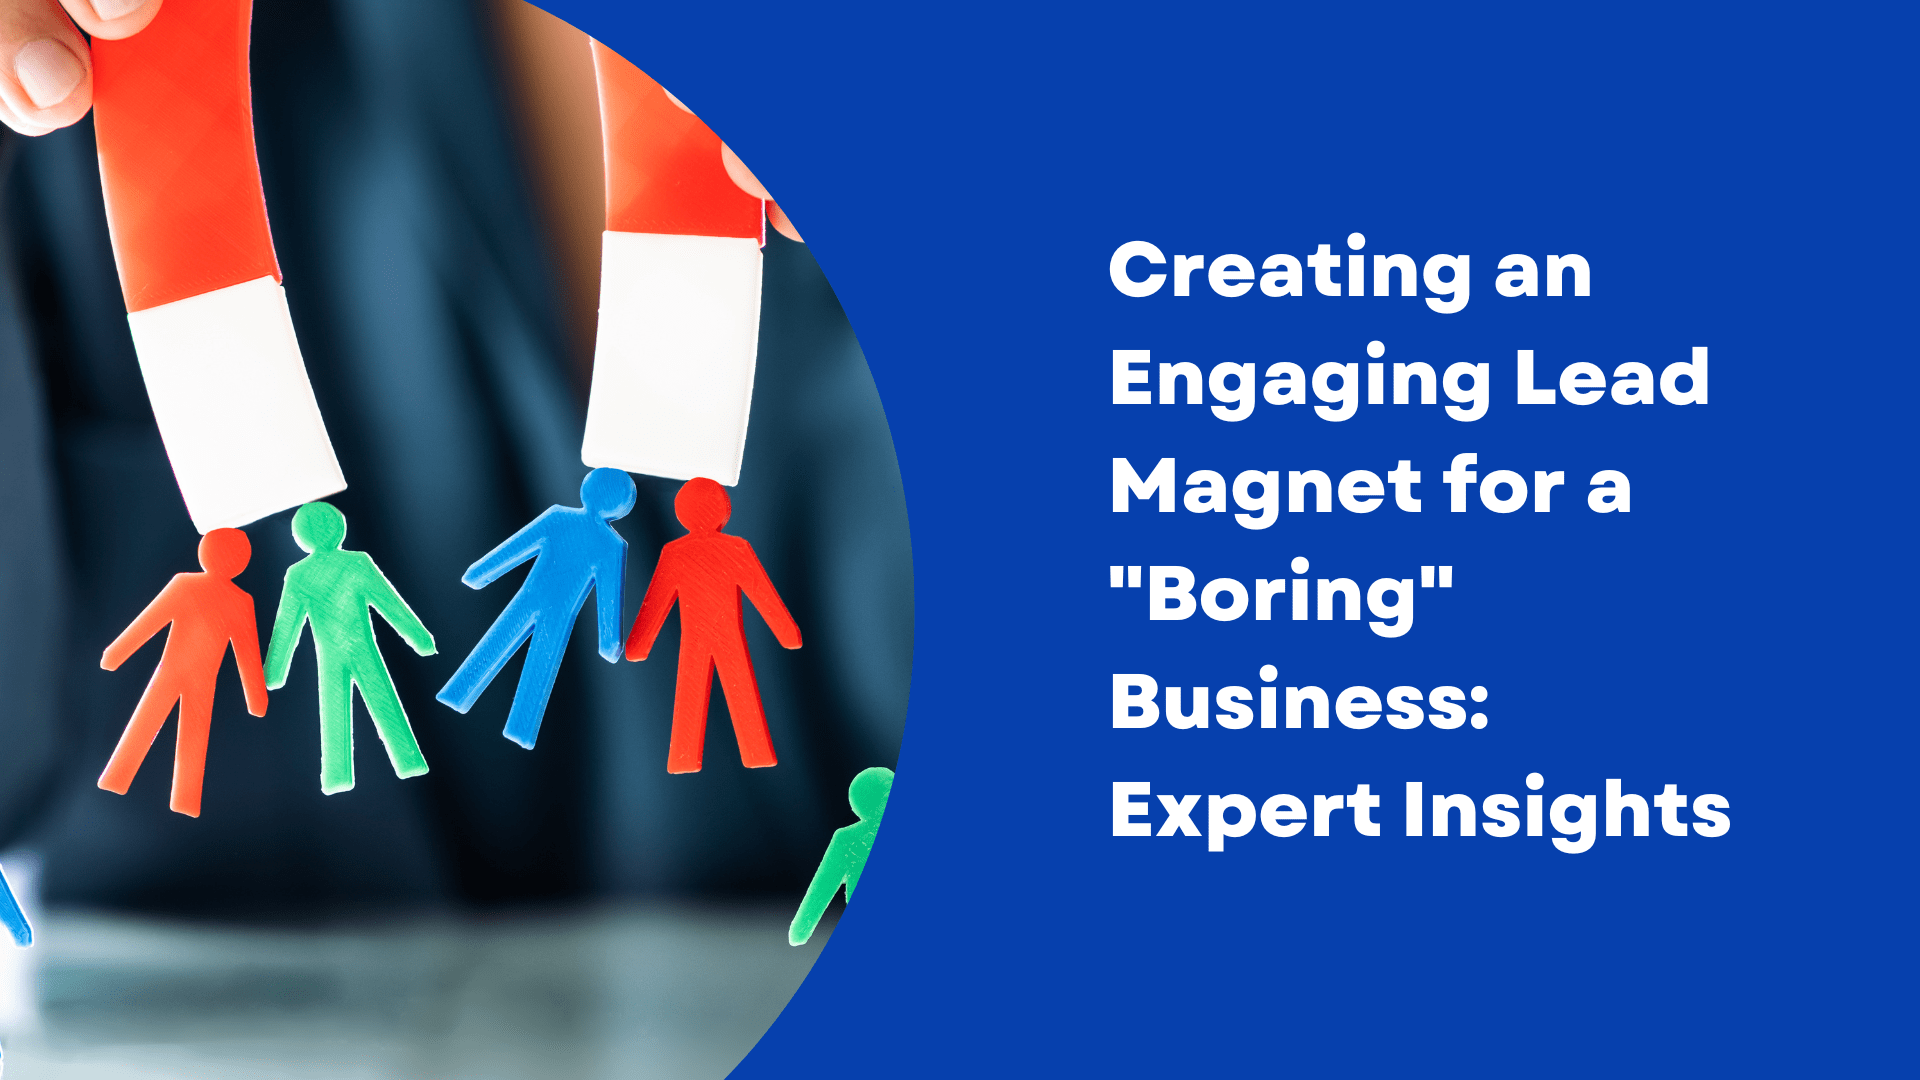 Creating an Engaging Lead Magnet for a Boring Business: Expert Insights